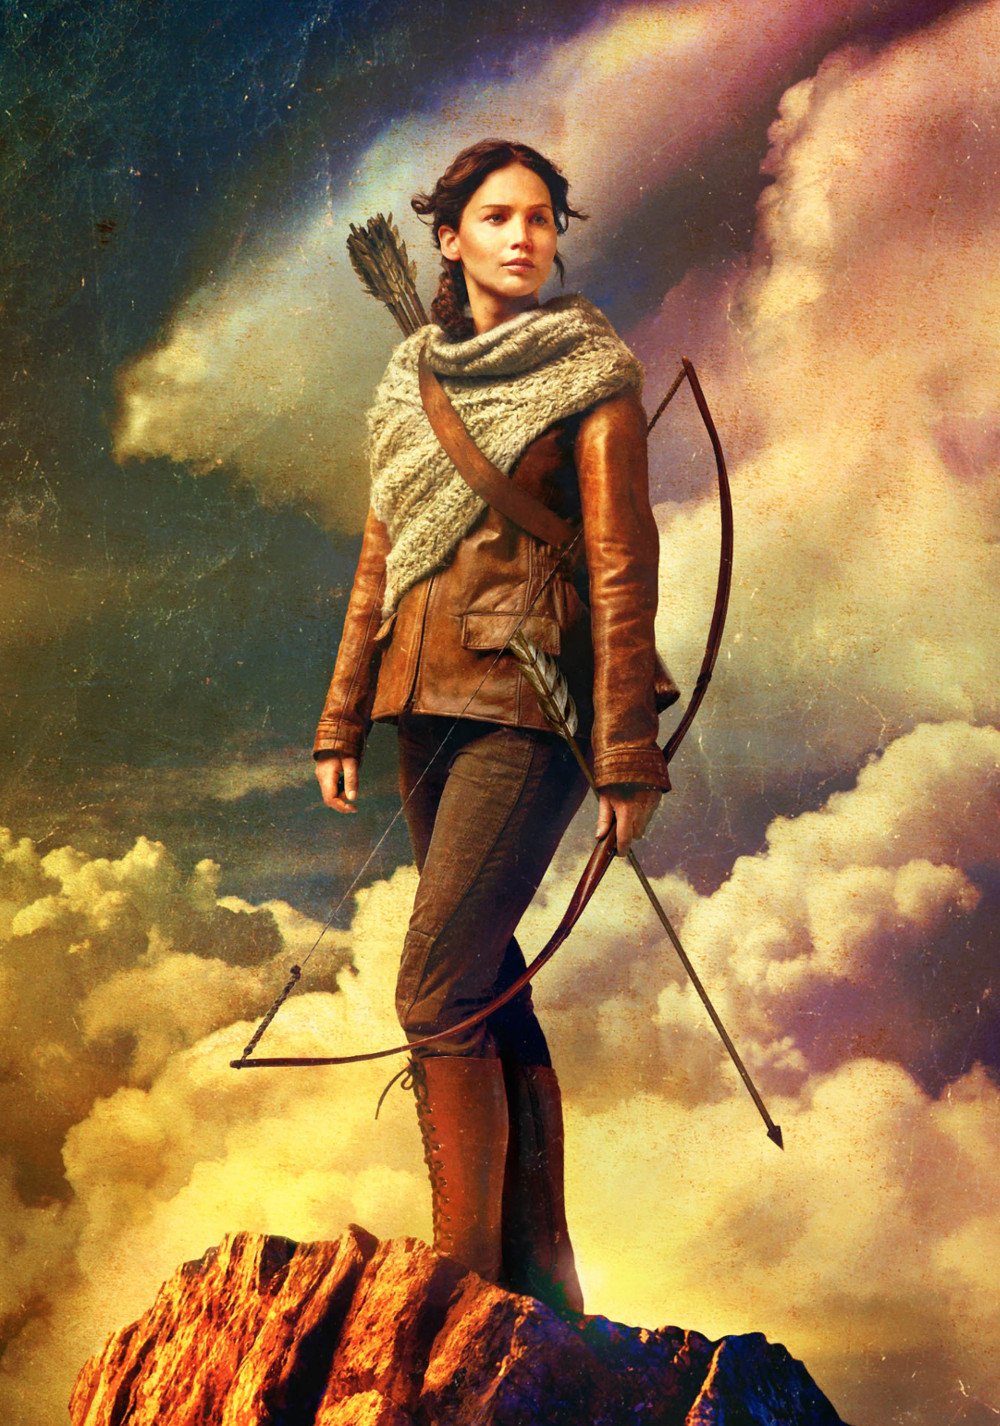 The Hunger Games: Catching Fire DVD Release Date | Redbox 